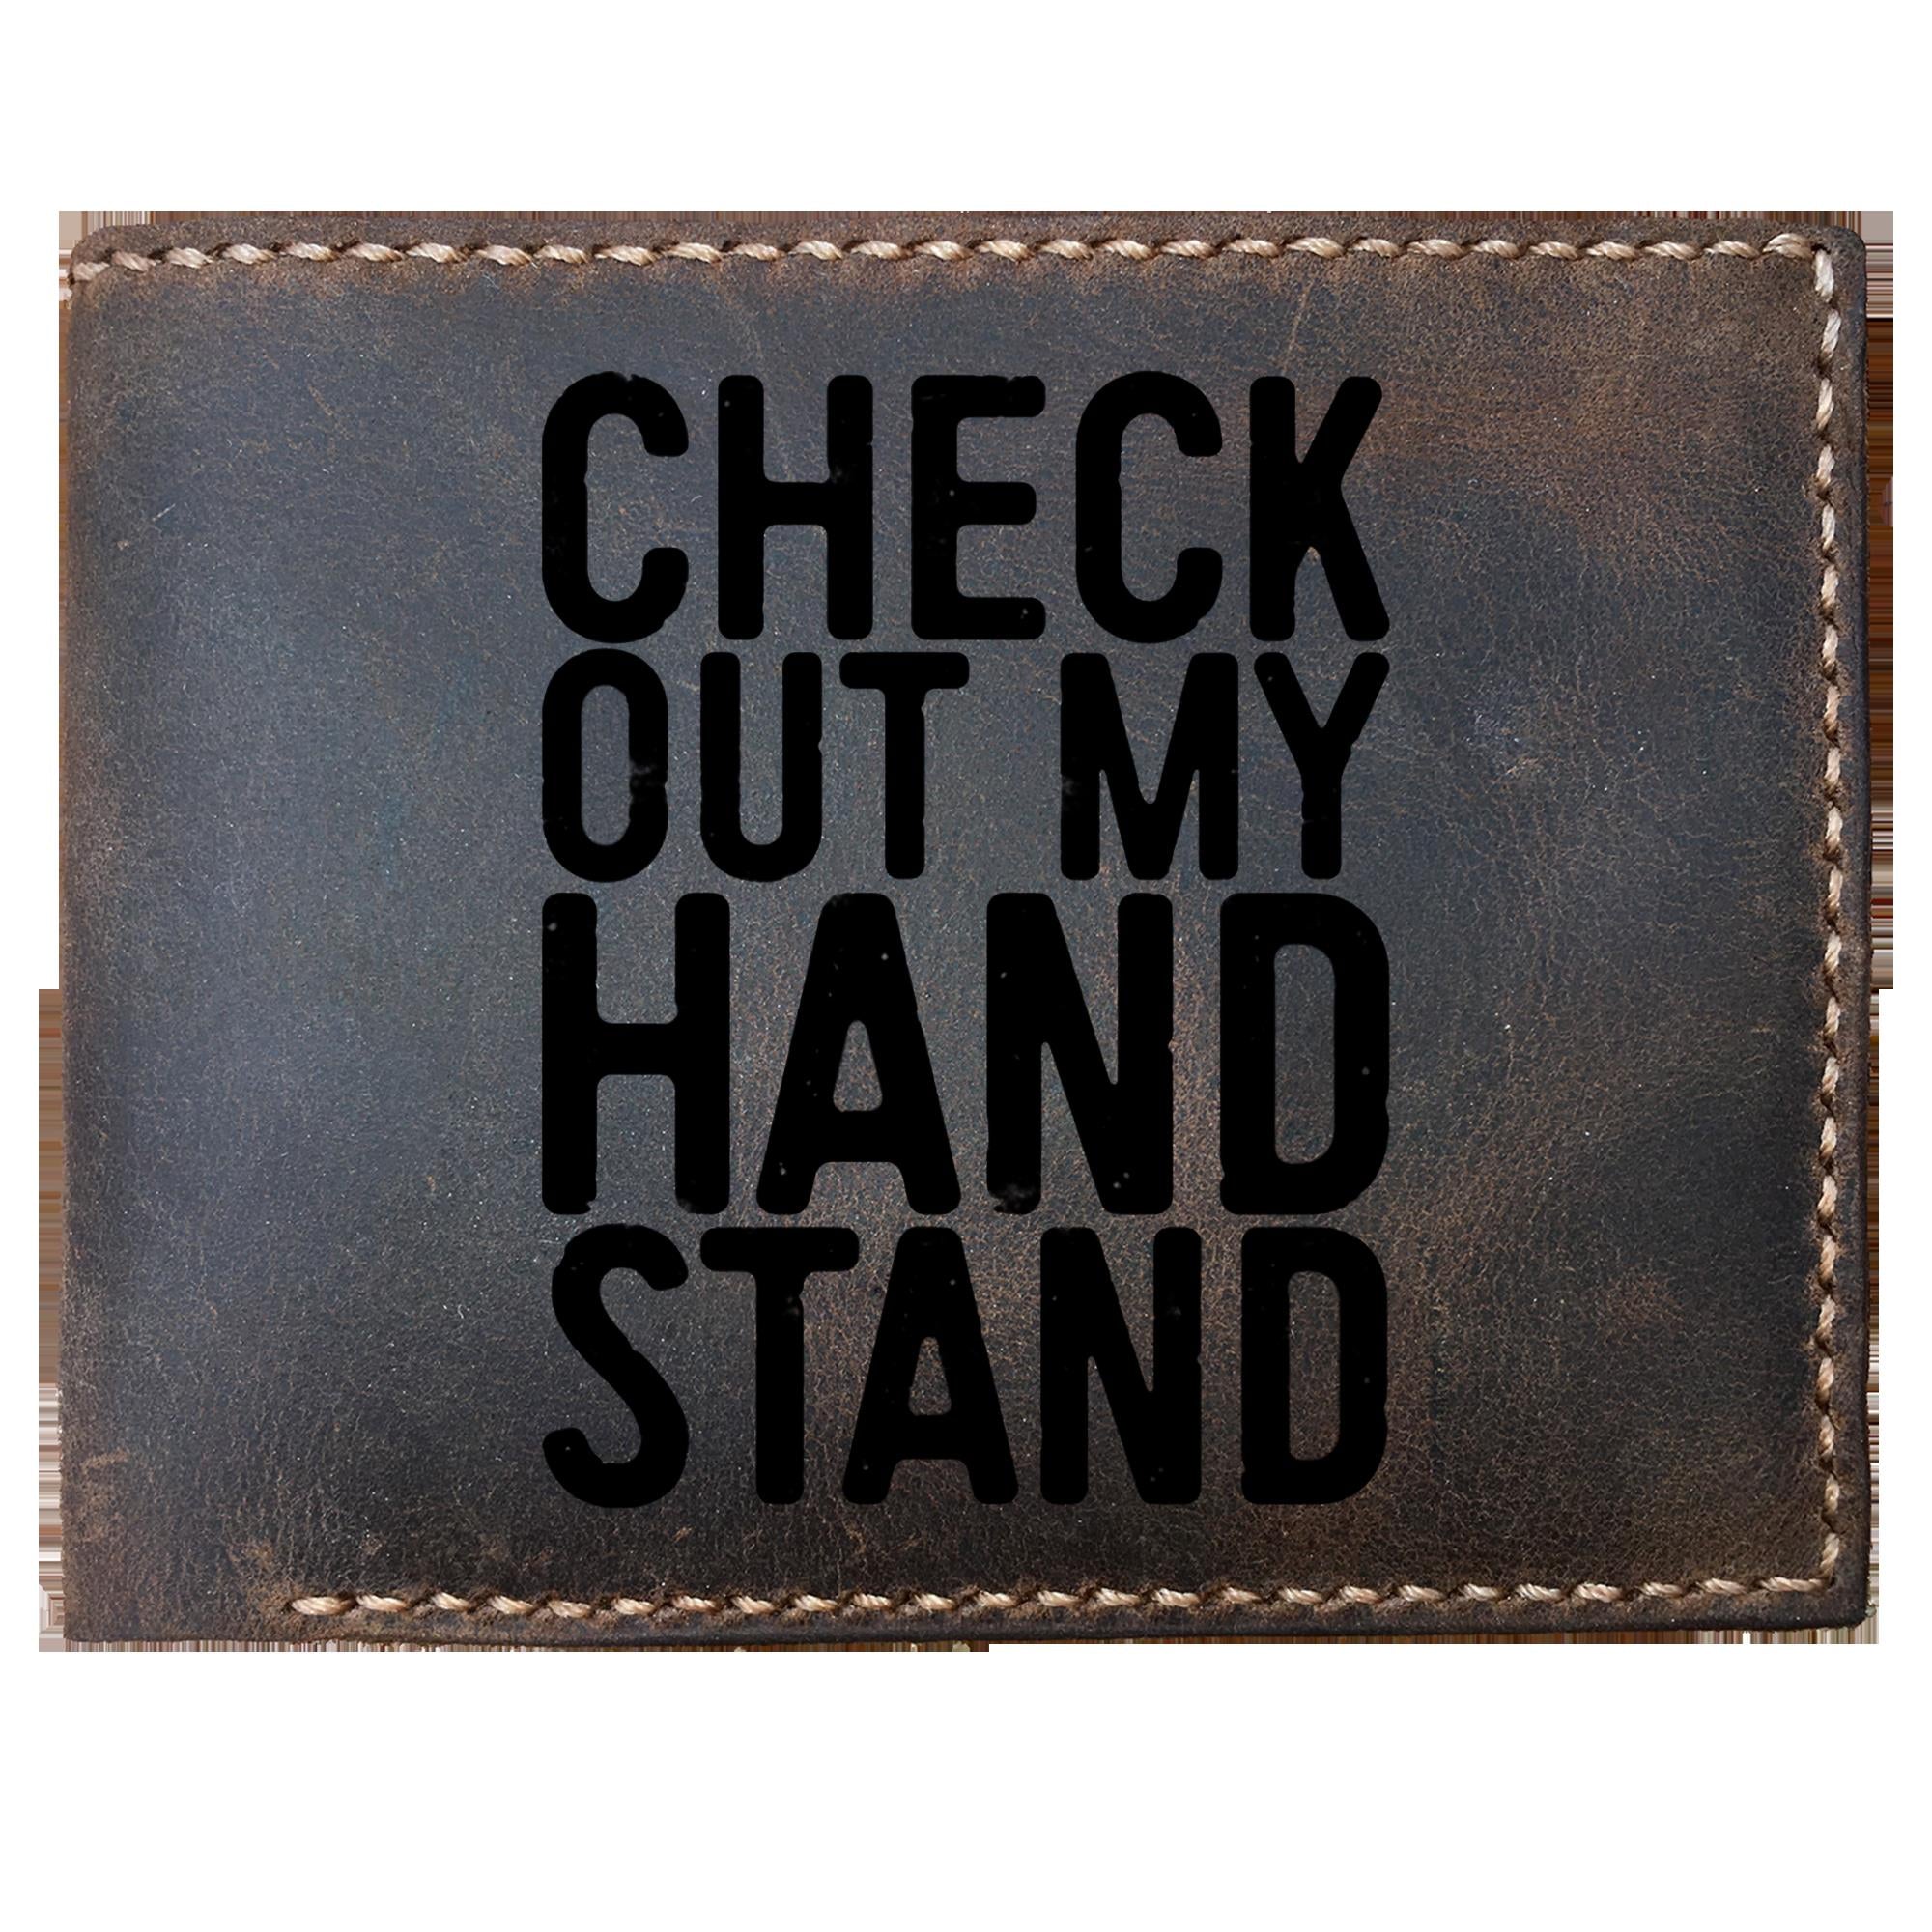 Skitongifts Funny Custom Laser Engraved Bifold Leather Wallet For Men, Check Out My Handstand